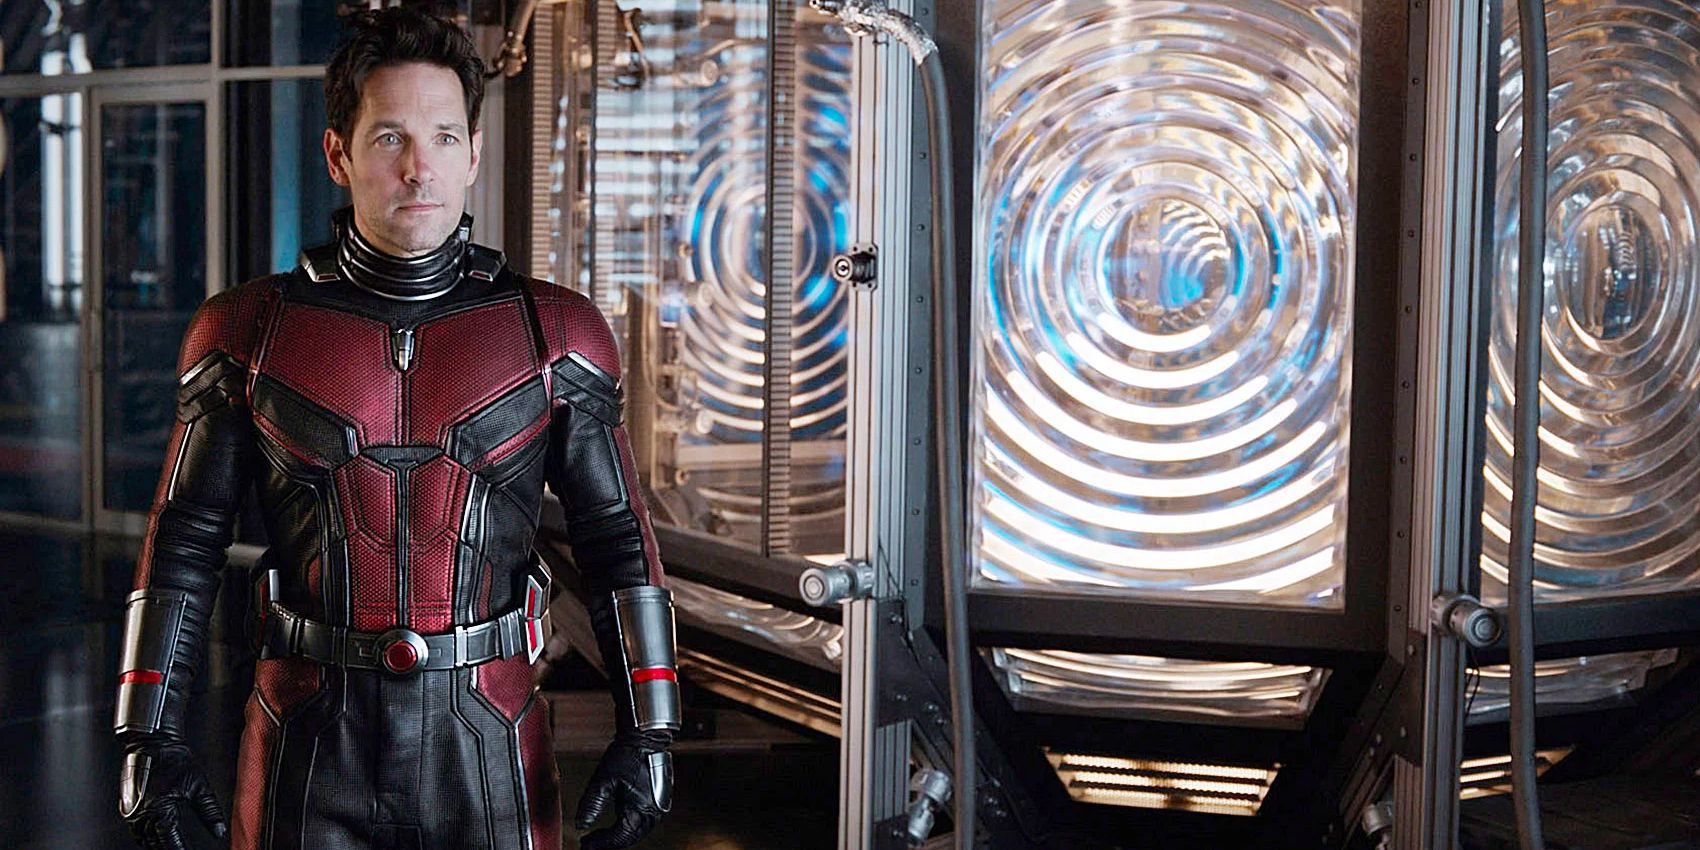 Scott Lang aka Ant-Man stands in his suit in a laboratory.